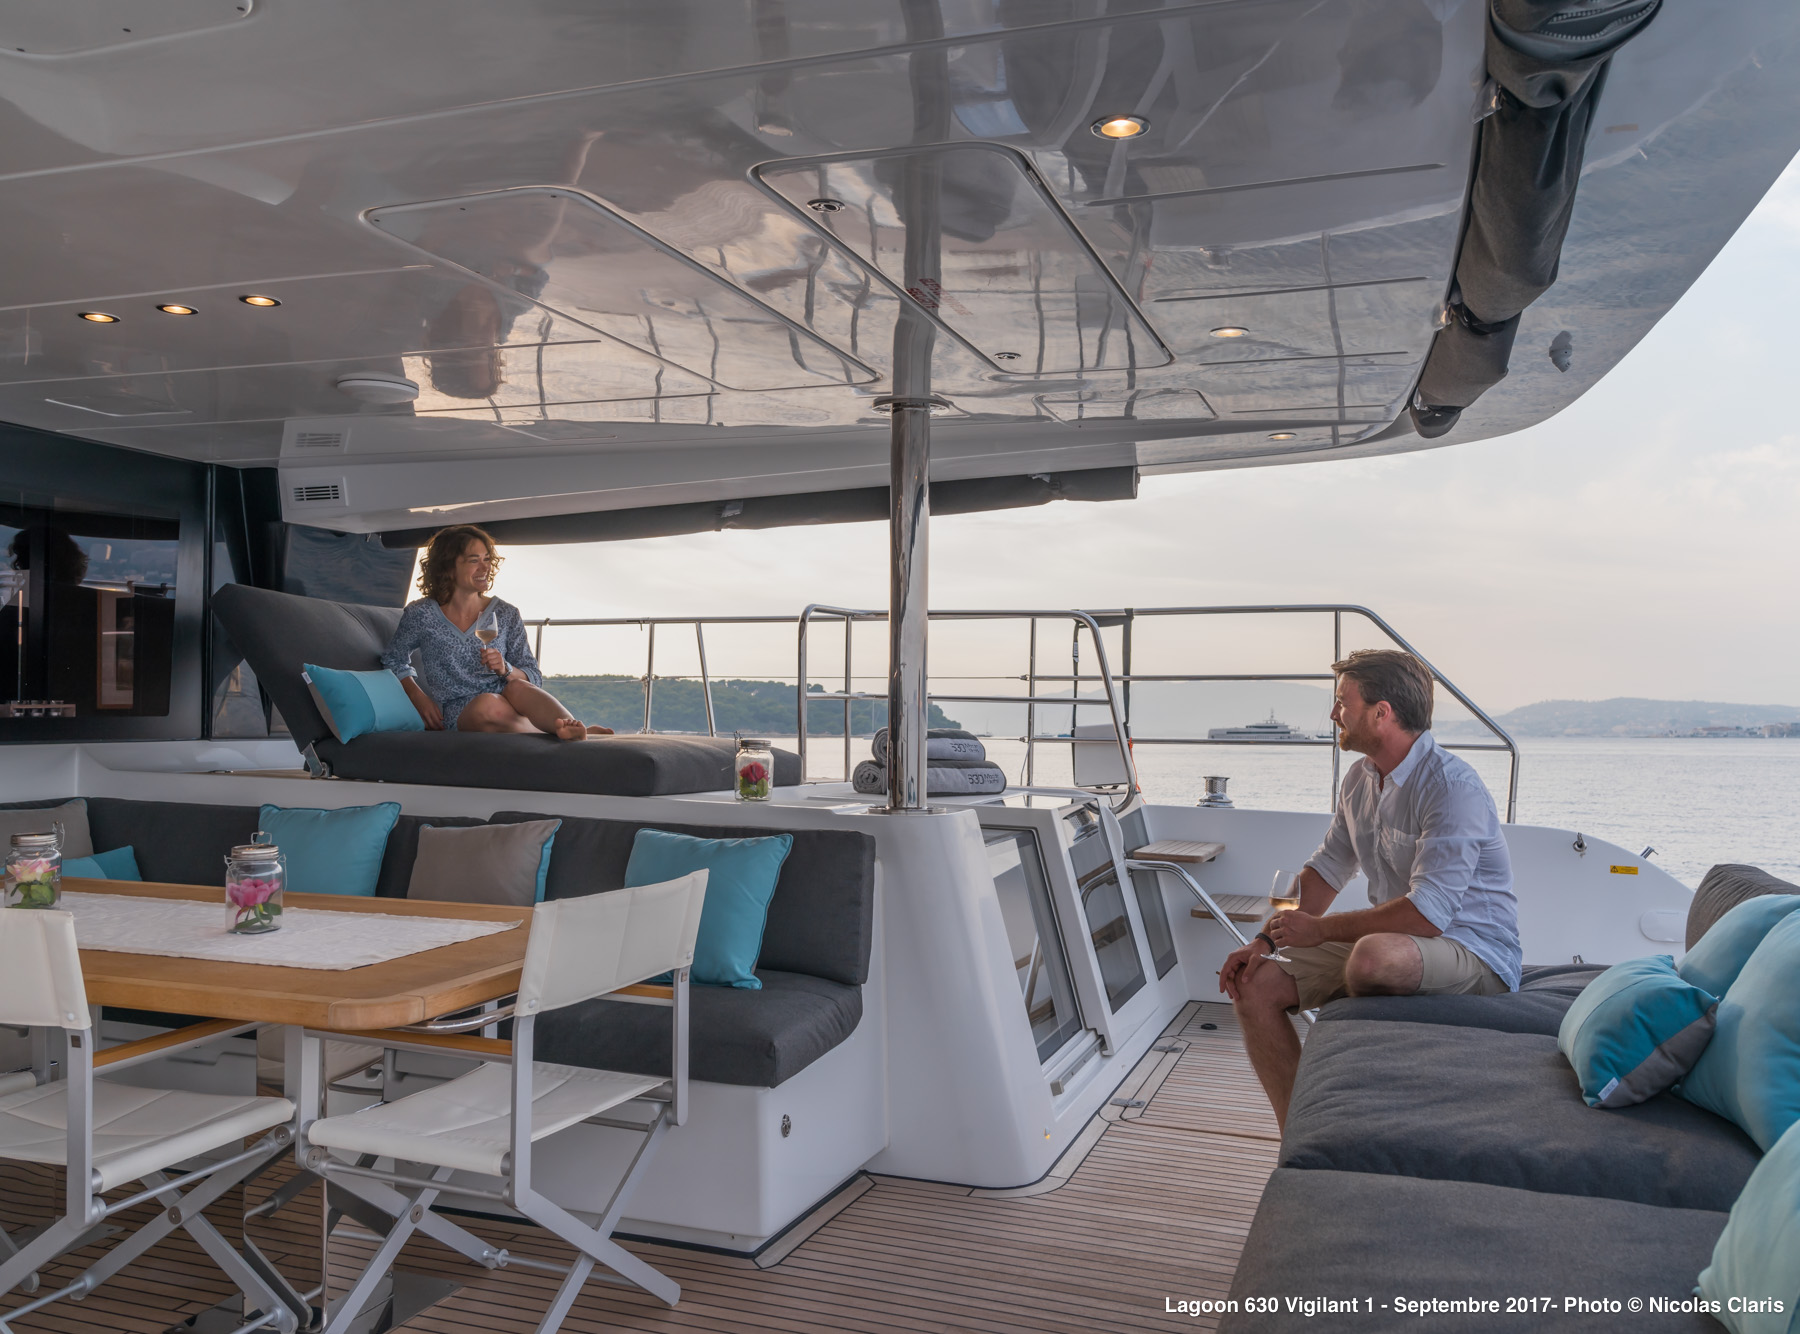 Aft Deck Seating And Dining